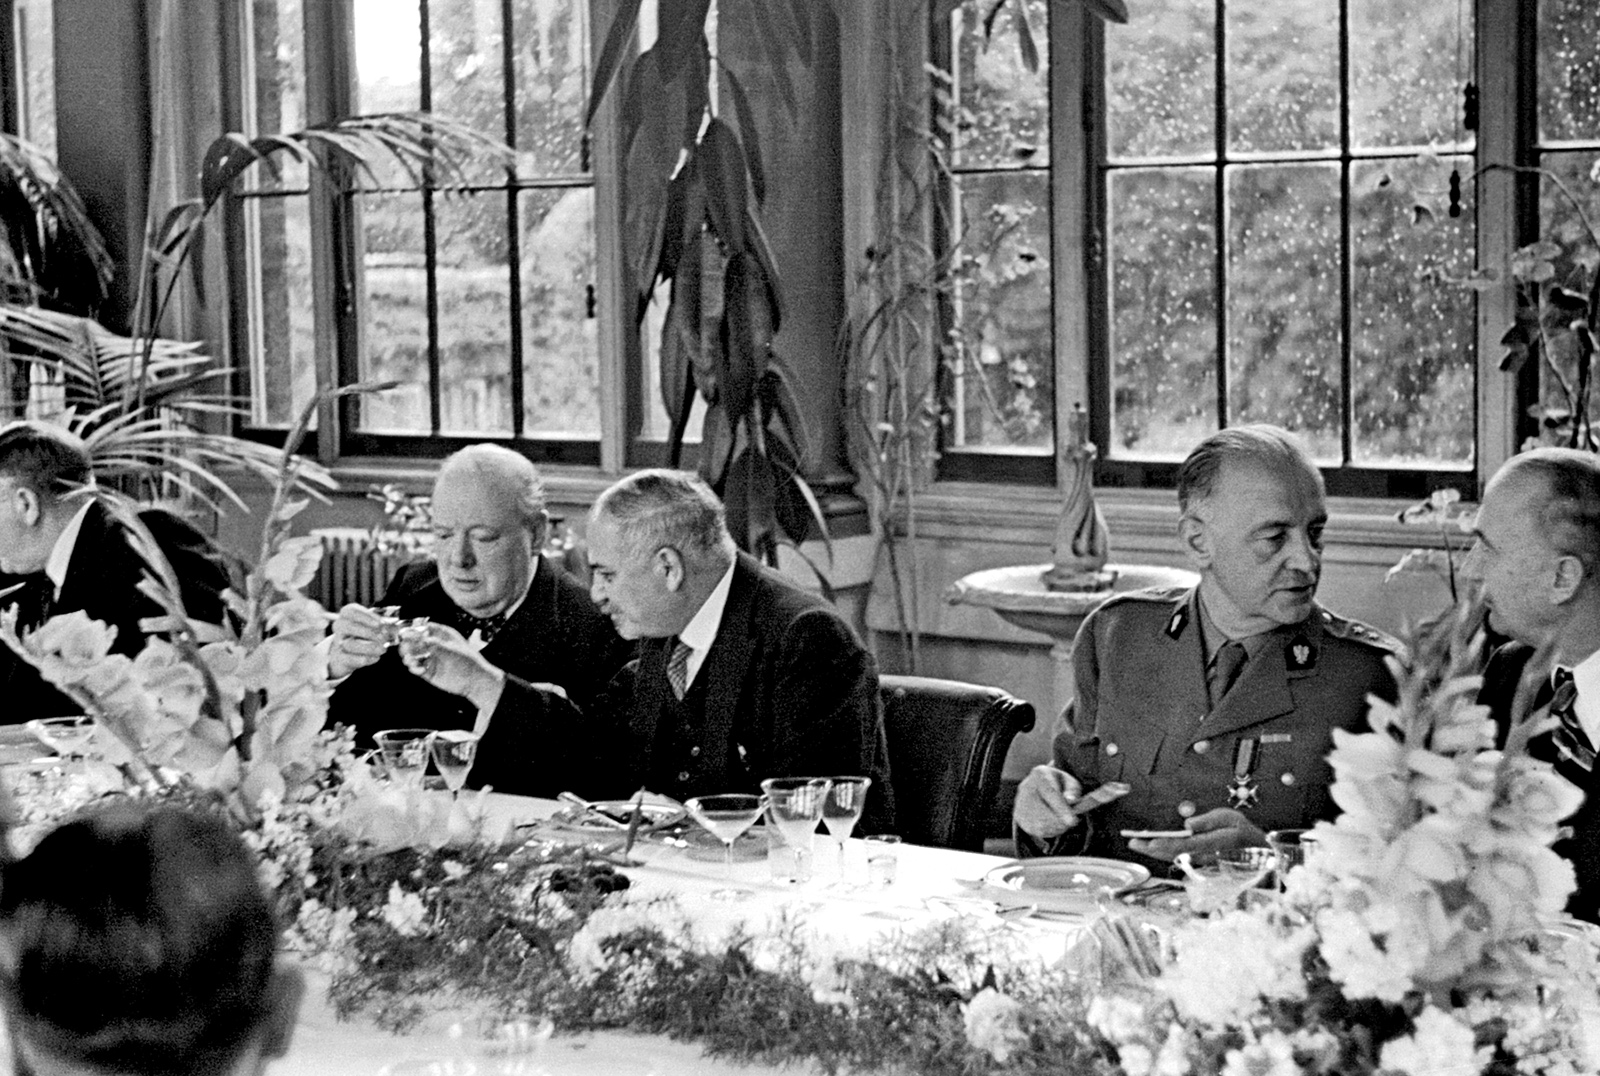 Ivan Maisky (second from left), the Soviet ambassador to London between 1932 and 1943, with Winston Churchill at the Allied ambassadors’ lunch at the Soviet embassy, September 1941. General Władysław Sikorski, prime minister of the Polish government in exile, is second from right.